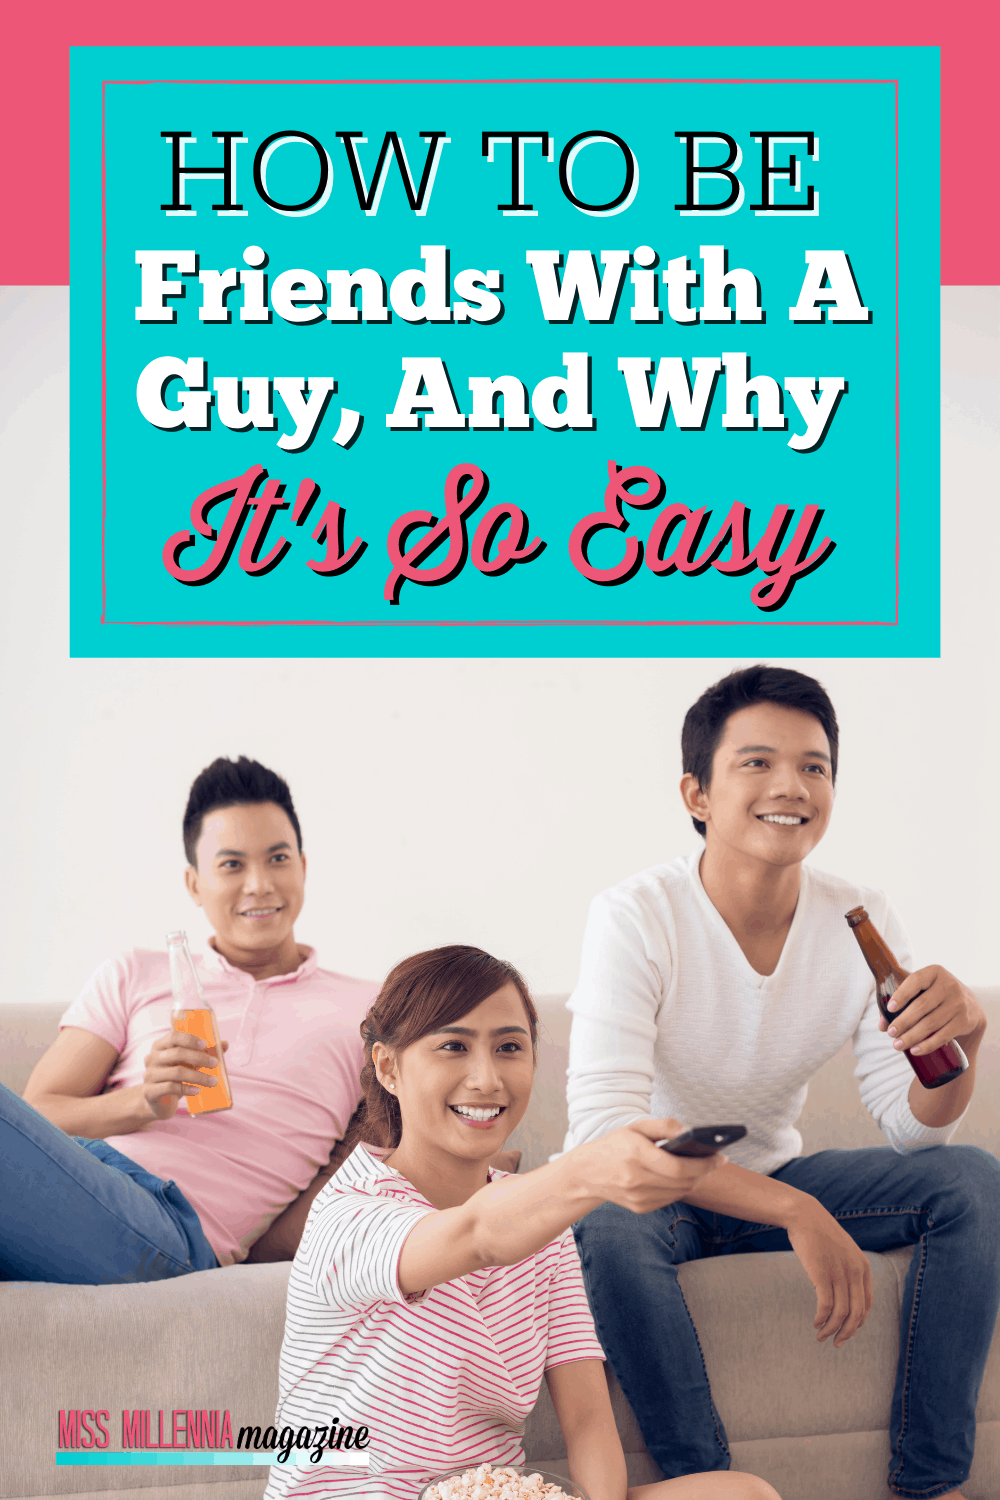 How To Be Friends With A Guy, And Why It’s So Easy